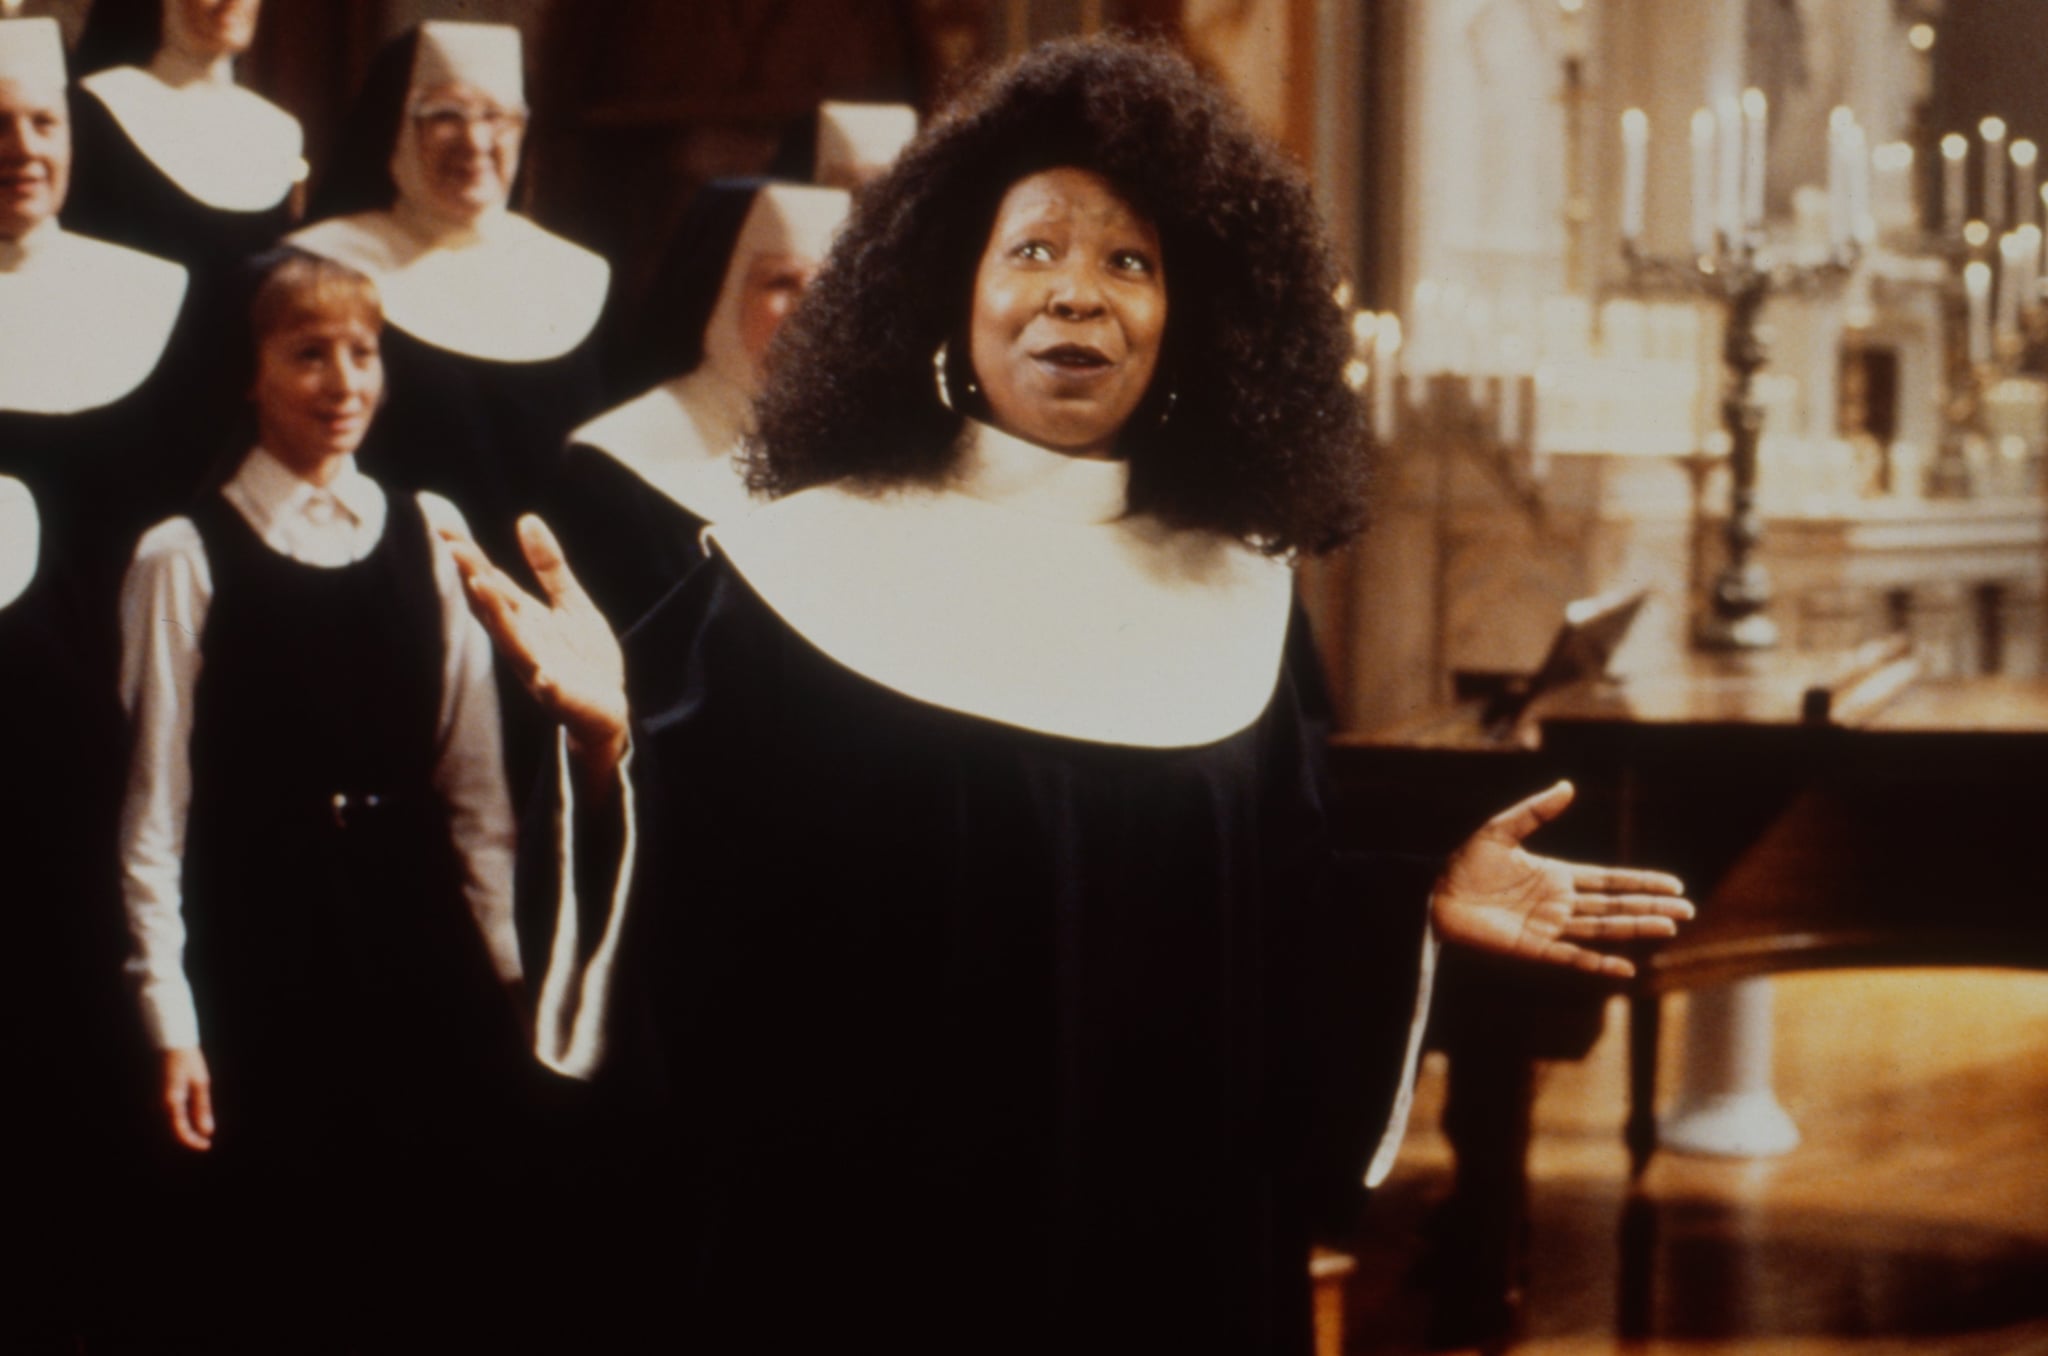 SISTER ACT, WHOOPI GOLDBERG, 1992. Buena Vista Pictures / Courtesy Everett Collection